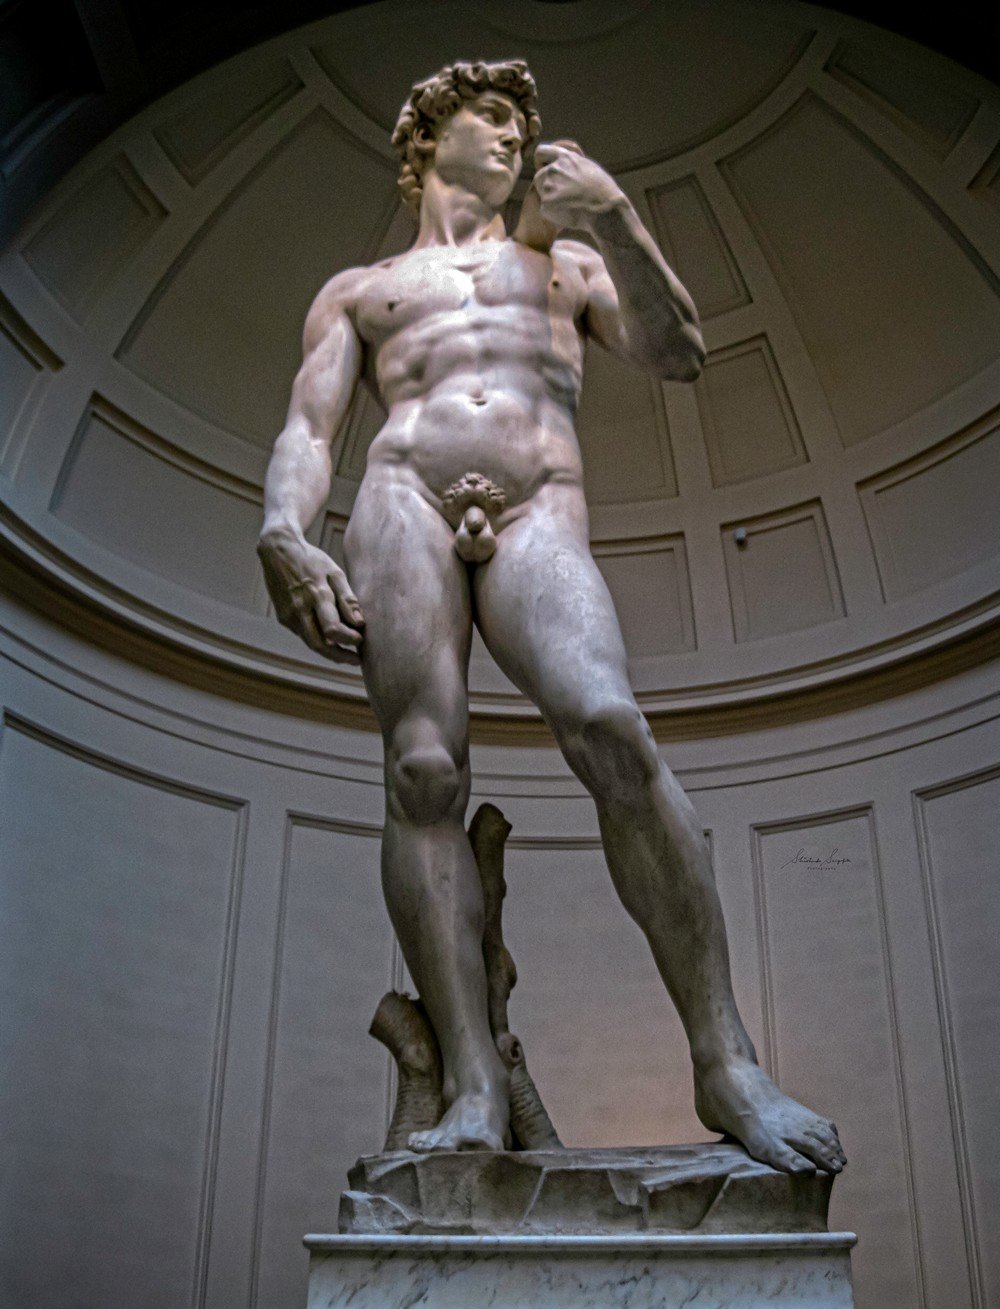 the original version of Michelangelo's David in Accademia gallery florence tuscany Italy